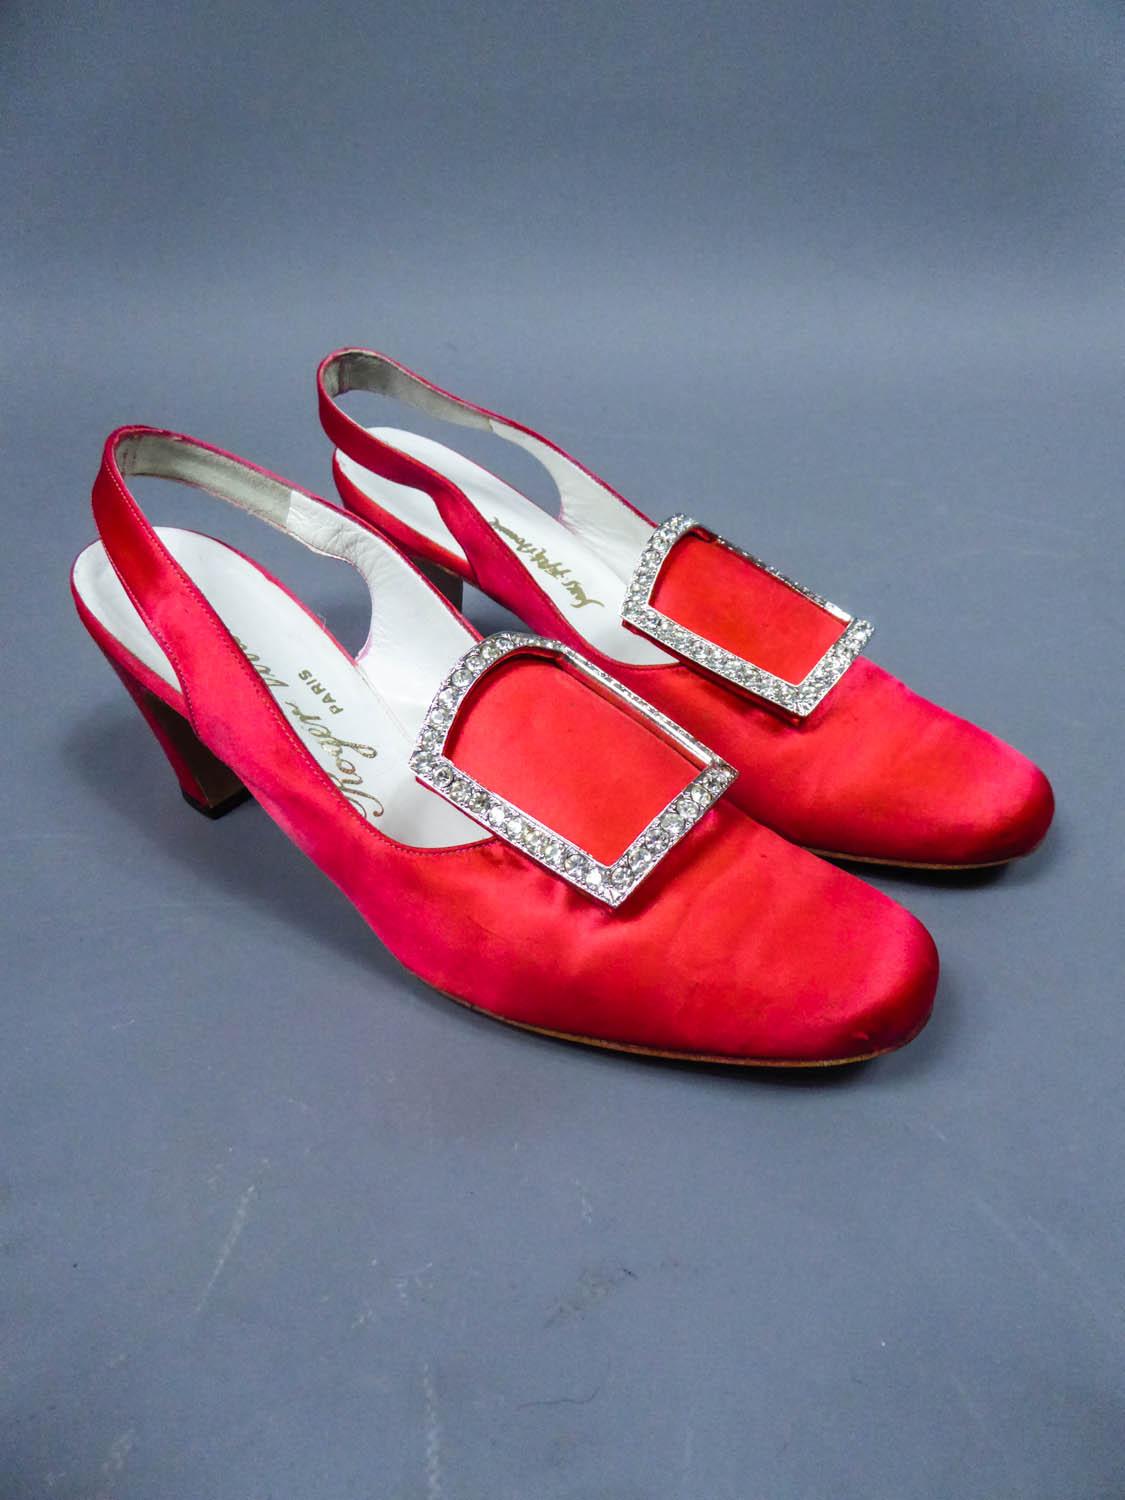 Women's An Iconic and Collectible Pair of Roger Vivier Red Satin Pumps Circa 1970